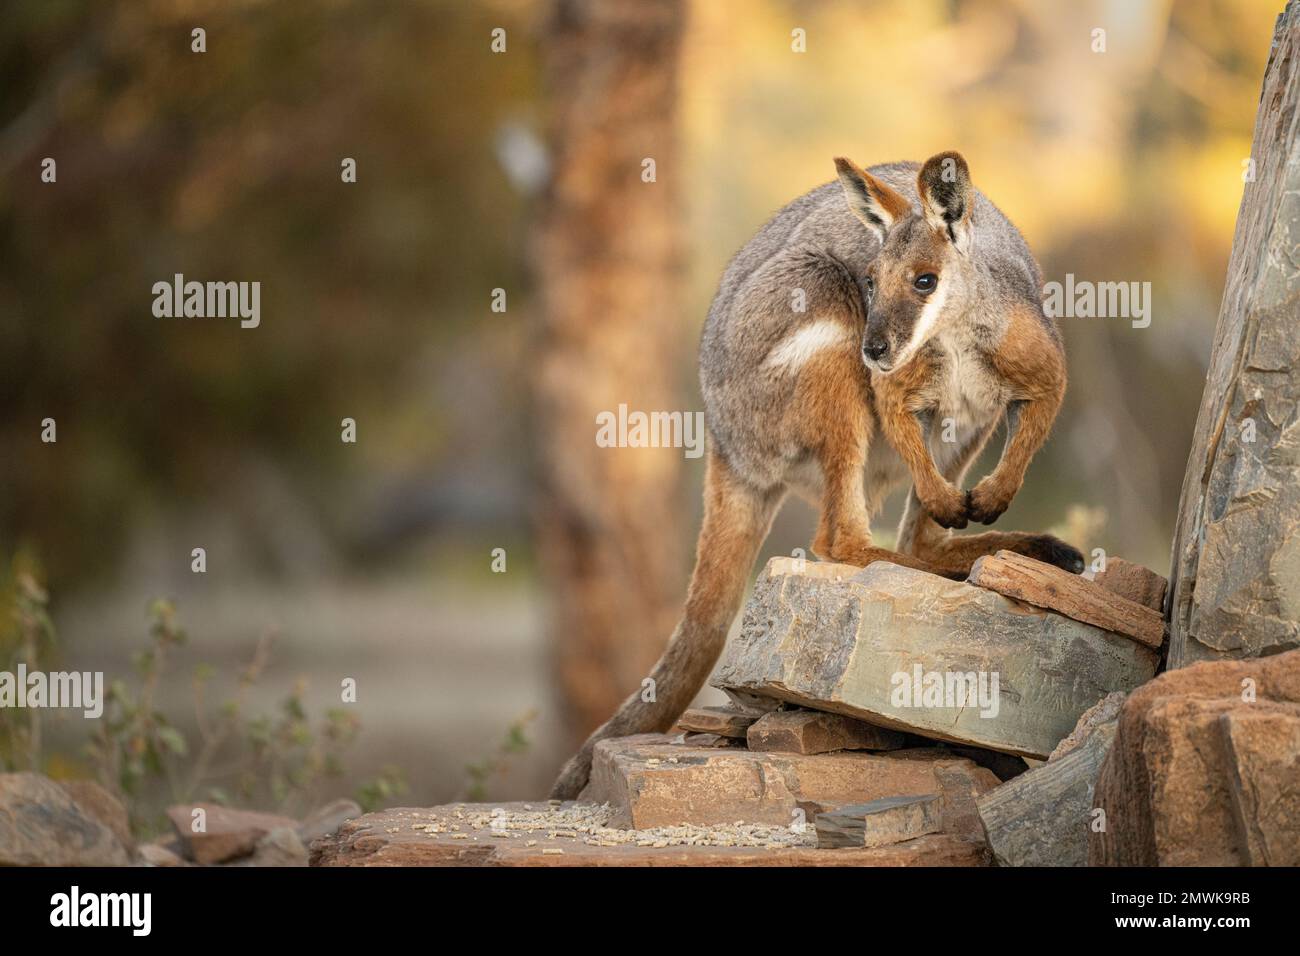 The endangered yellow-footed rock-wallaby at Arkaroola Wilderness Sanctuary South Australia. Stock Photo